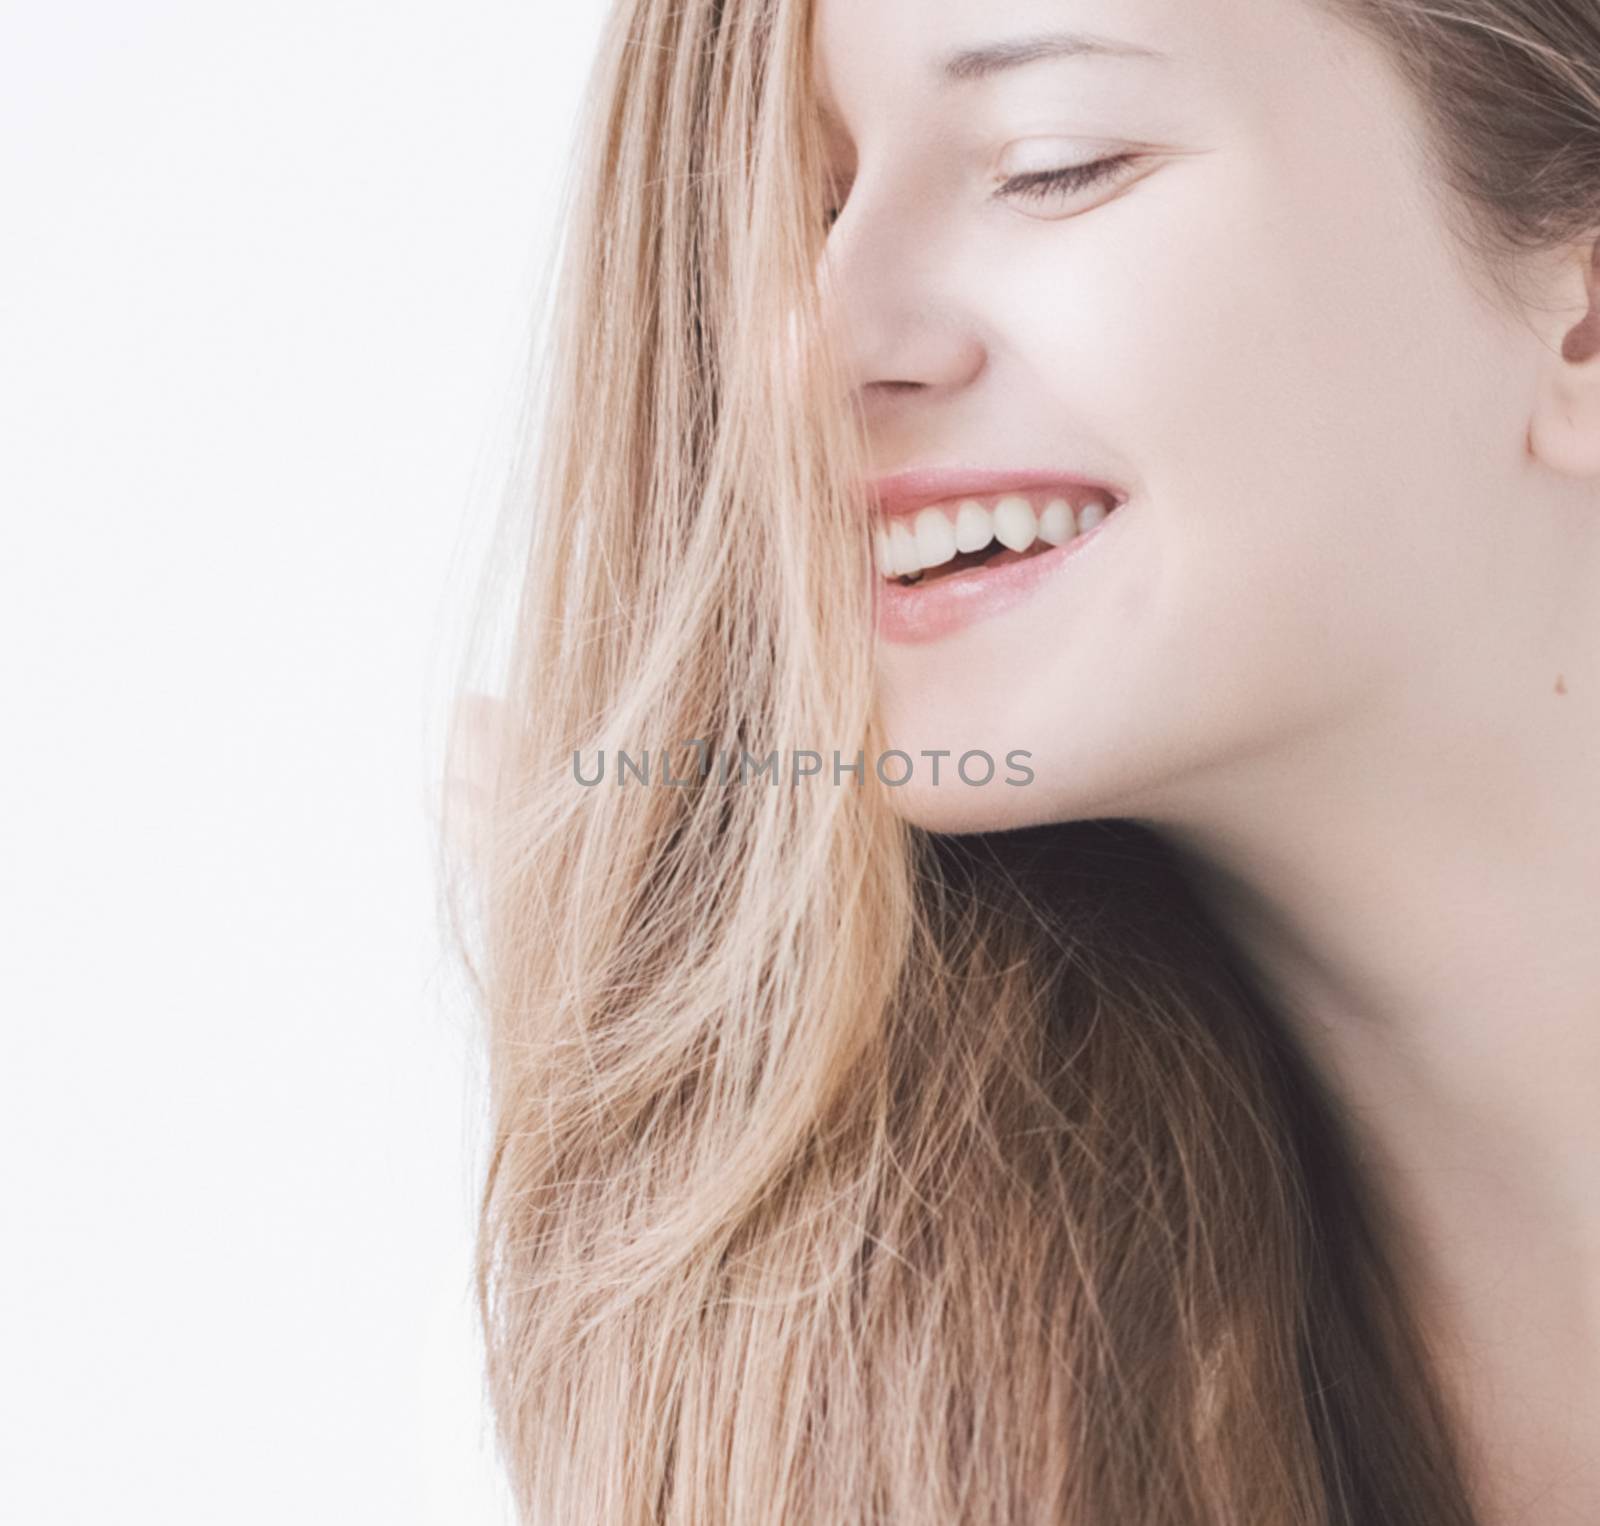 Feminine beauty, closeup face portrait of young woman with long hairstyle and natural makeup look for female hair care, cosmetic or skincare brands